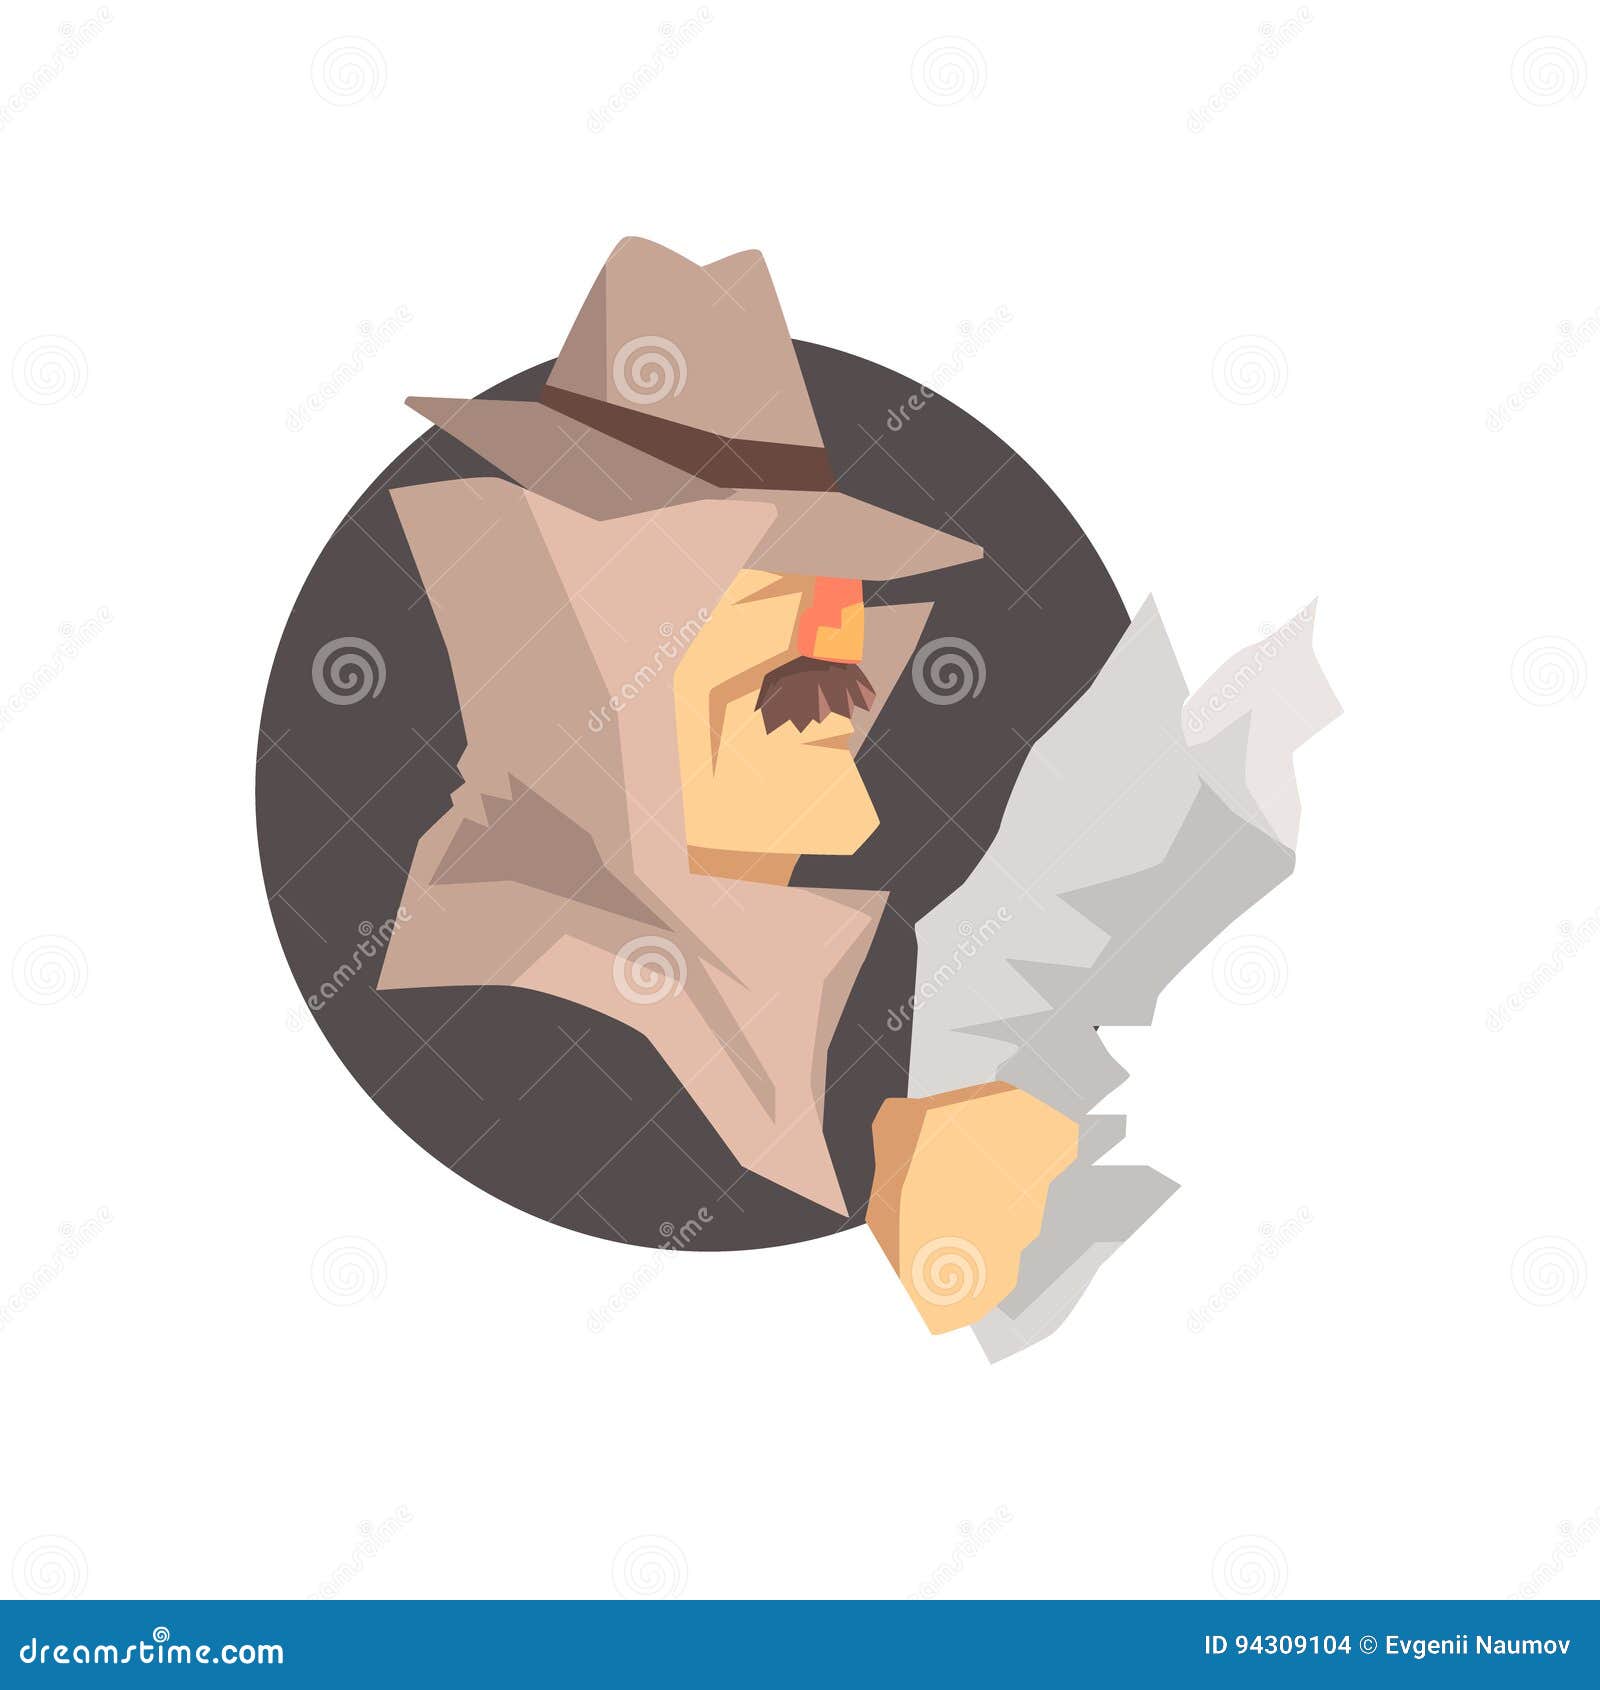 disguised detective character wearing classic fedora hat avatar